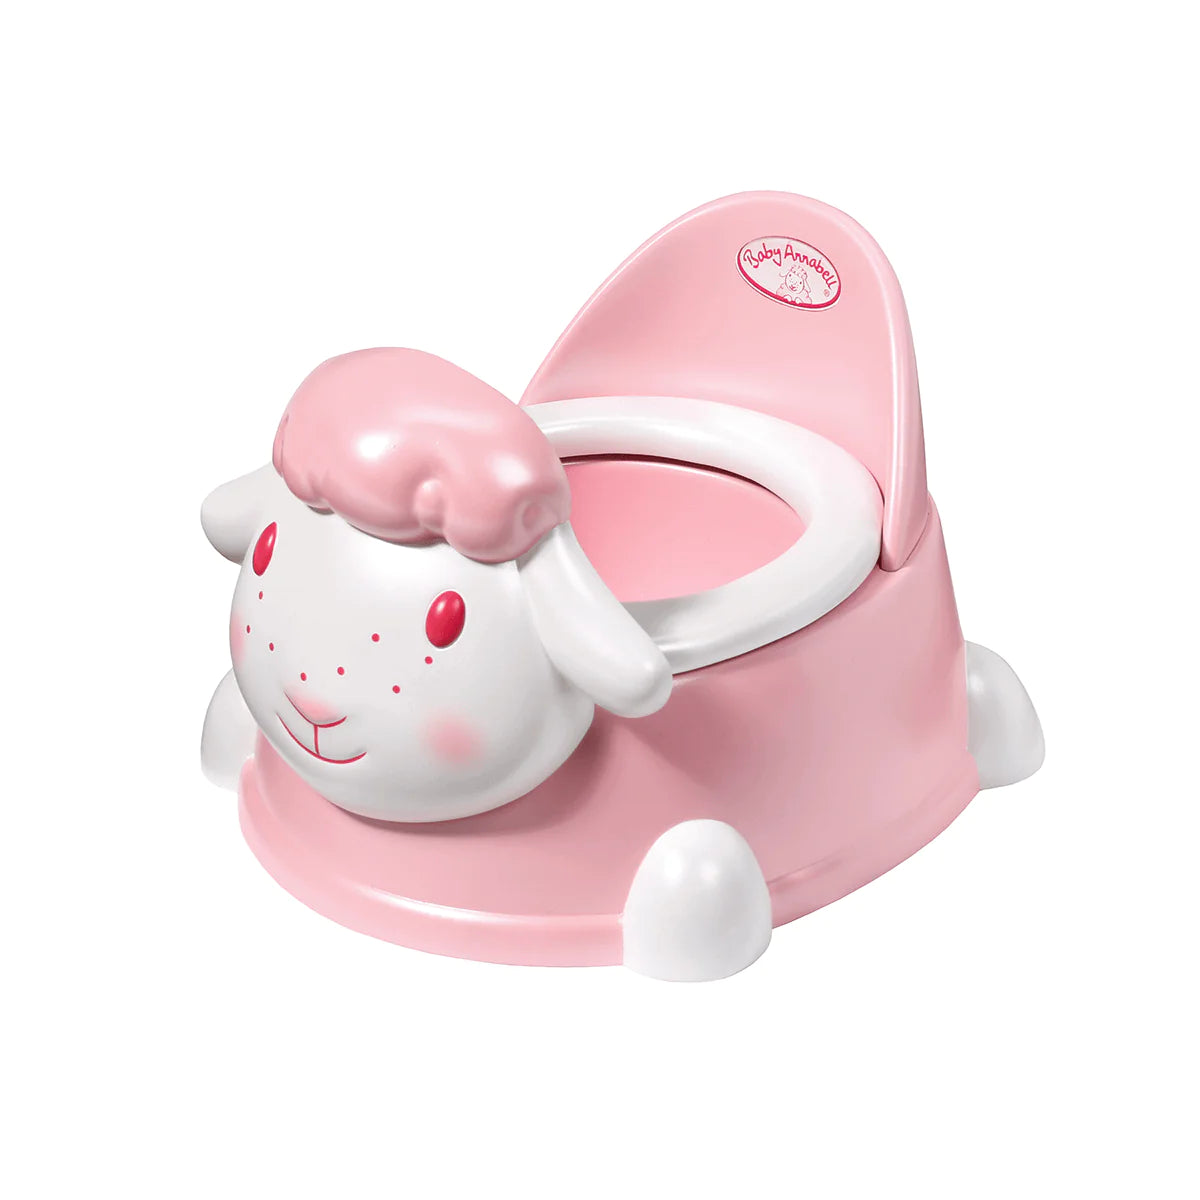 Baby Annabell Potty Time Dolls Potty